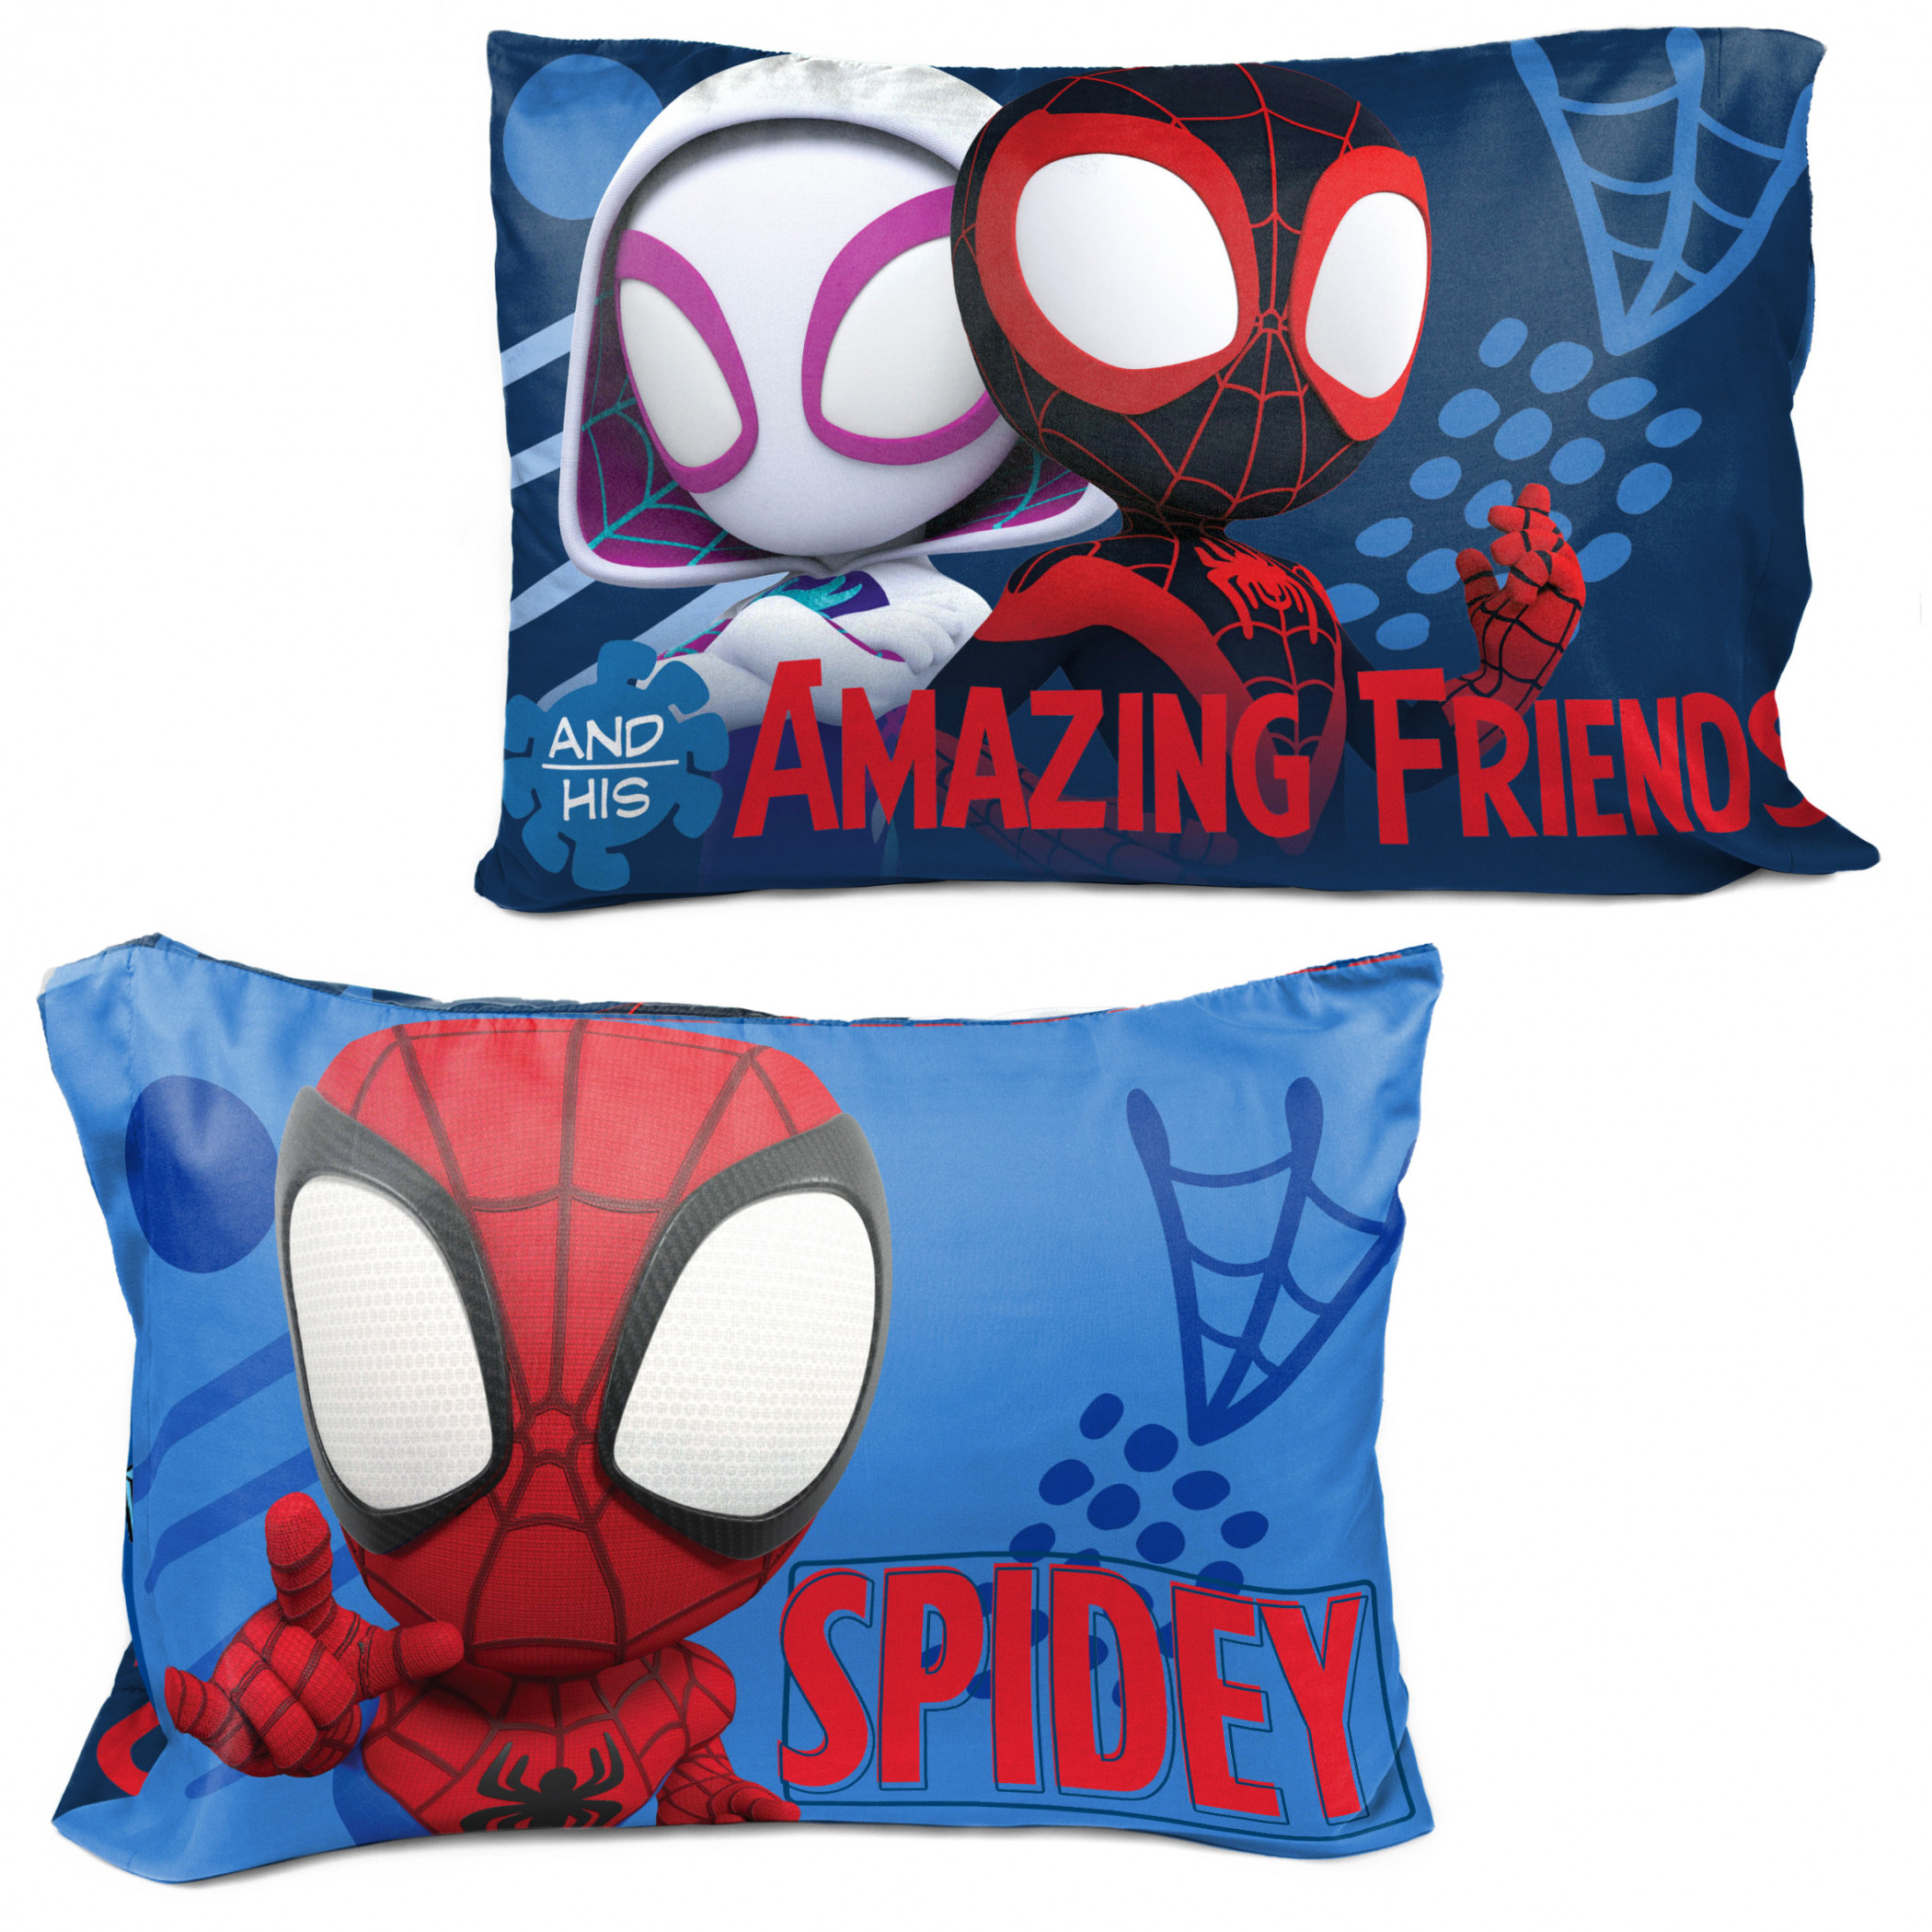 https://mmv2api.s3.us-east-2.amazonaws.com/products/images/Spidey%20&%20His%20amazing%20Friends%20Image%201.jpg